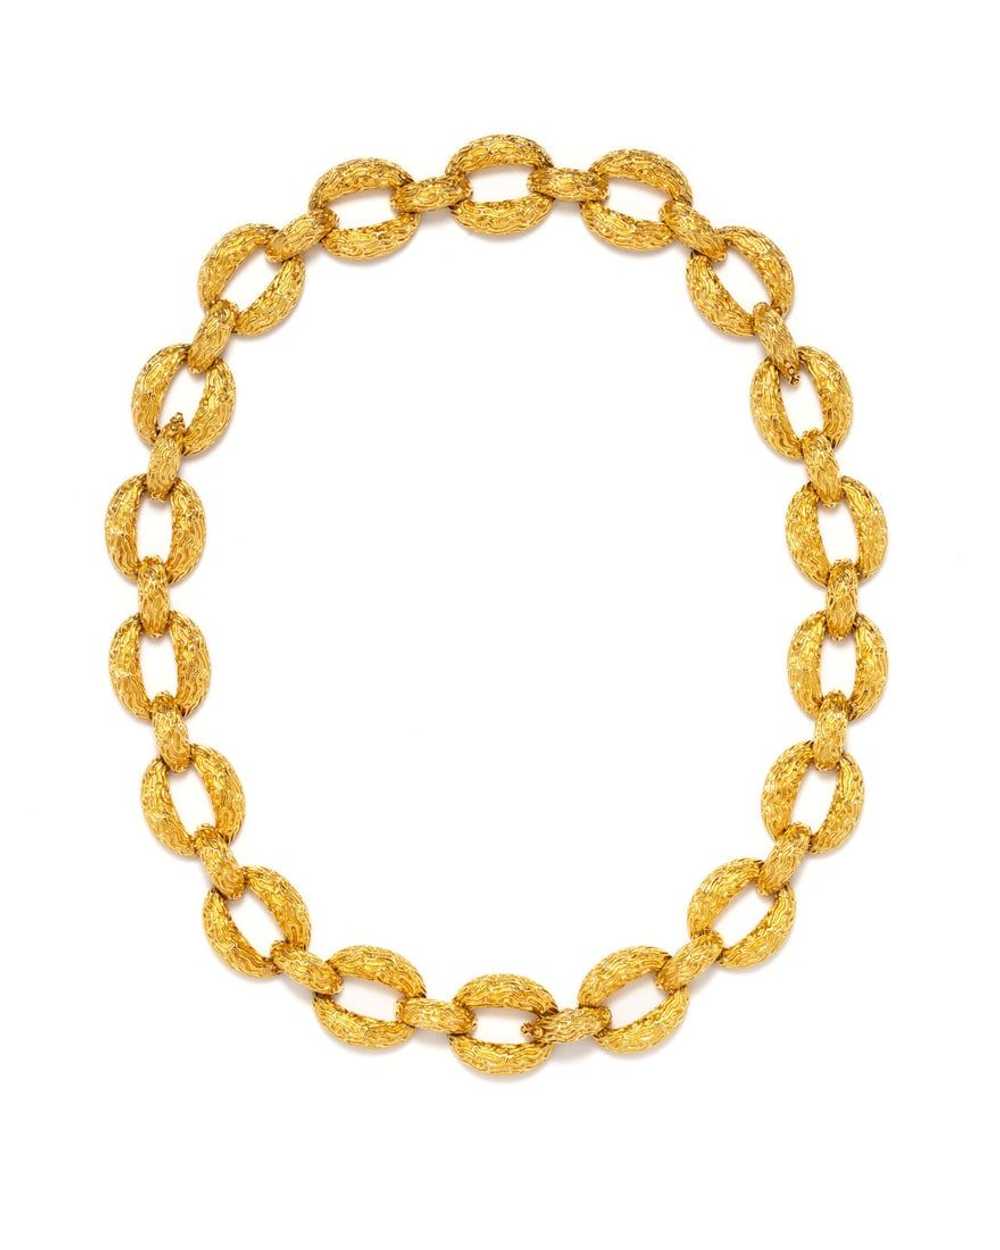 YELLOW GOLD CONVERTIBLE LINK NECKLACE - image 2